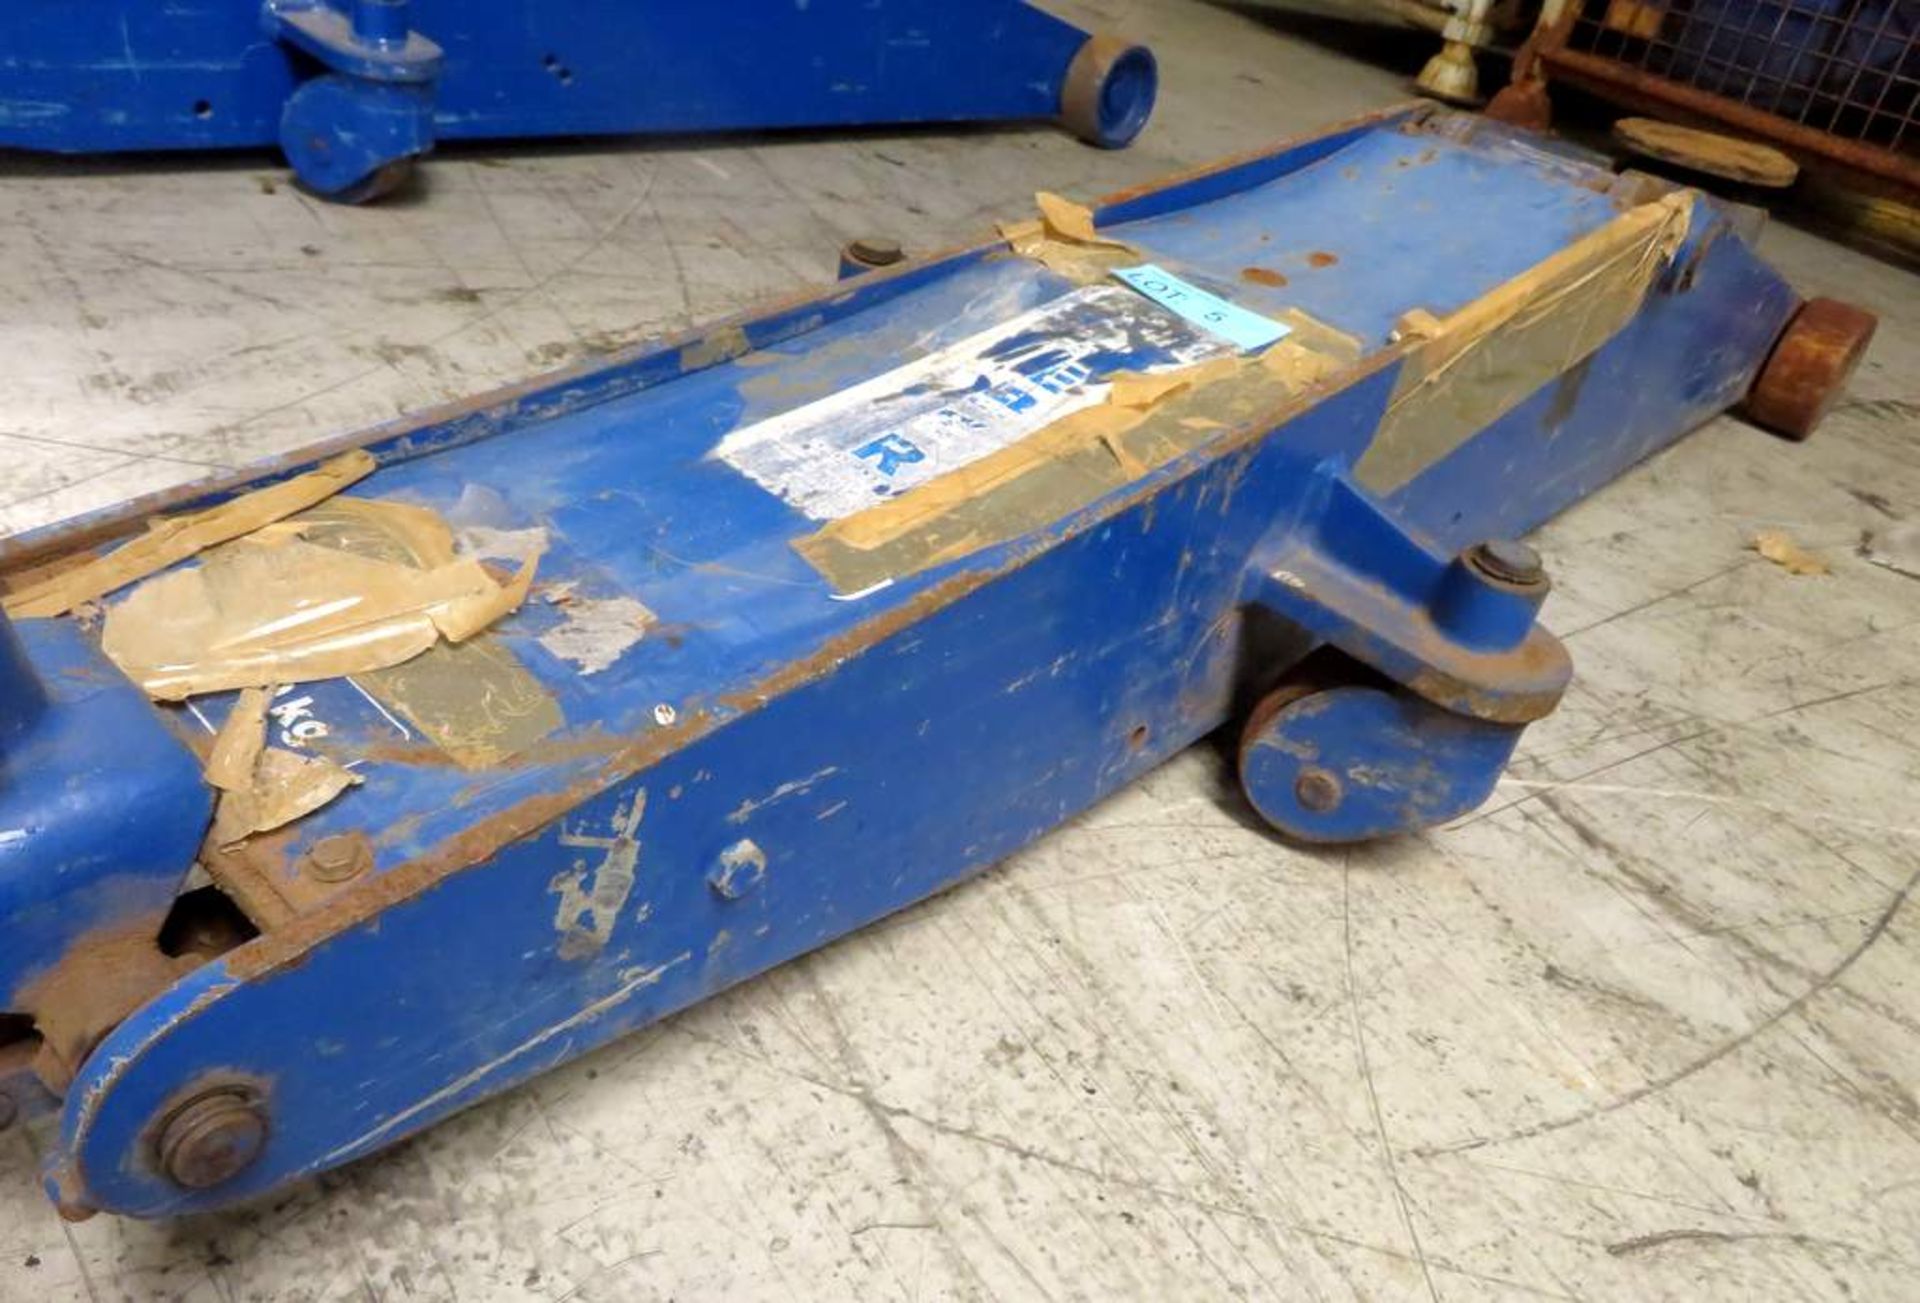 Weber 10 Tonne Vehicle Trolley Jack Complete With Handle - WDK100LQ - Working Condition - Image 4 of 7